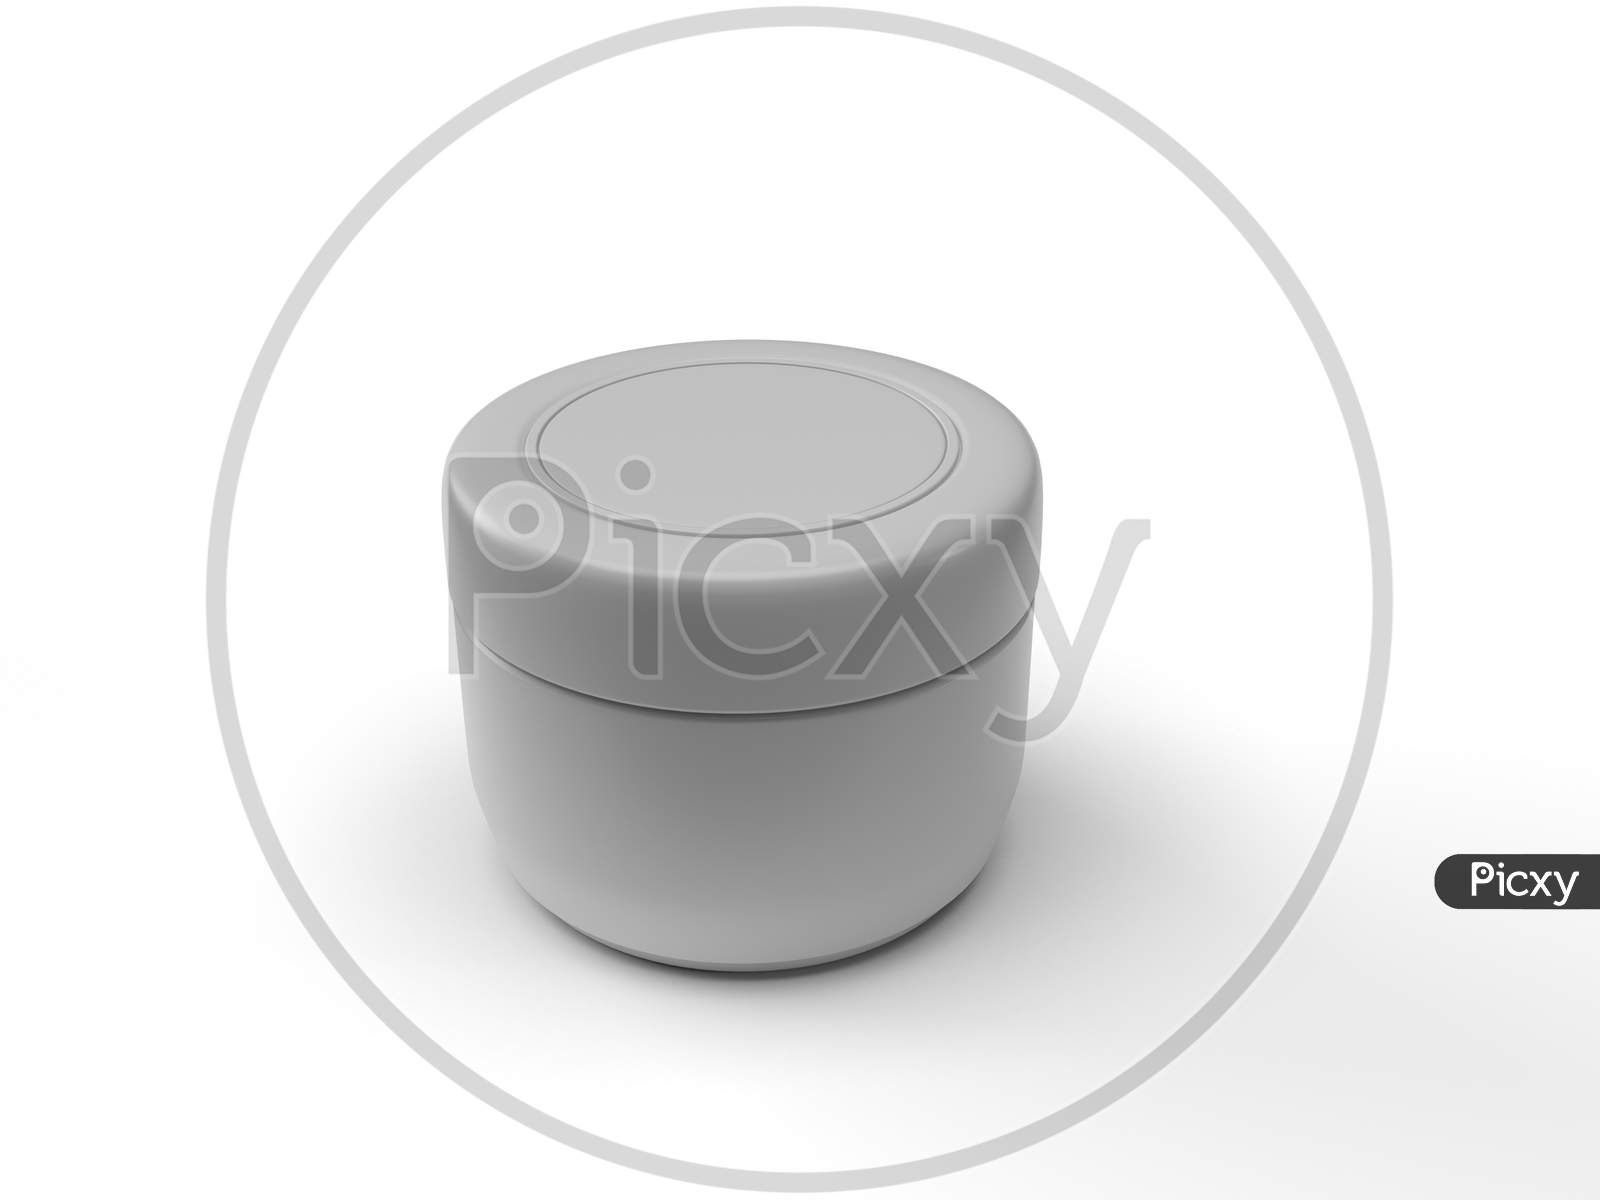 3D Render Of A Twist Jar For Blank Cosmetic Product Mockup In White Background.